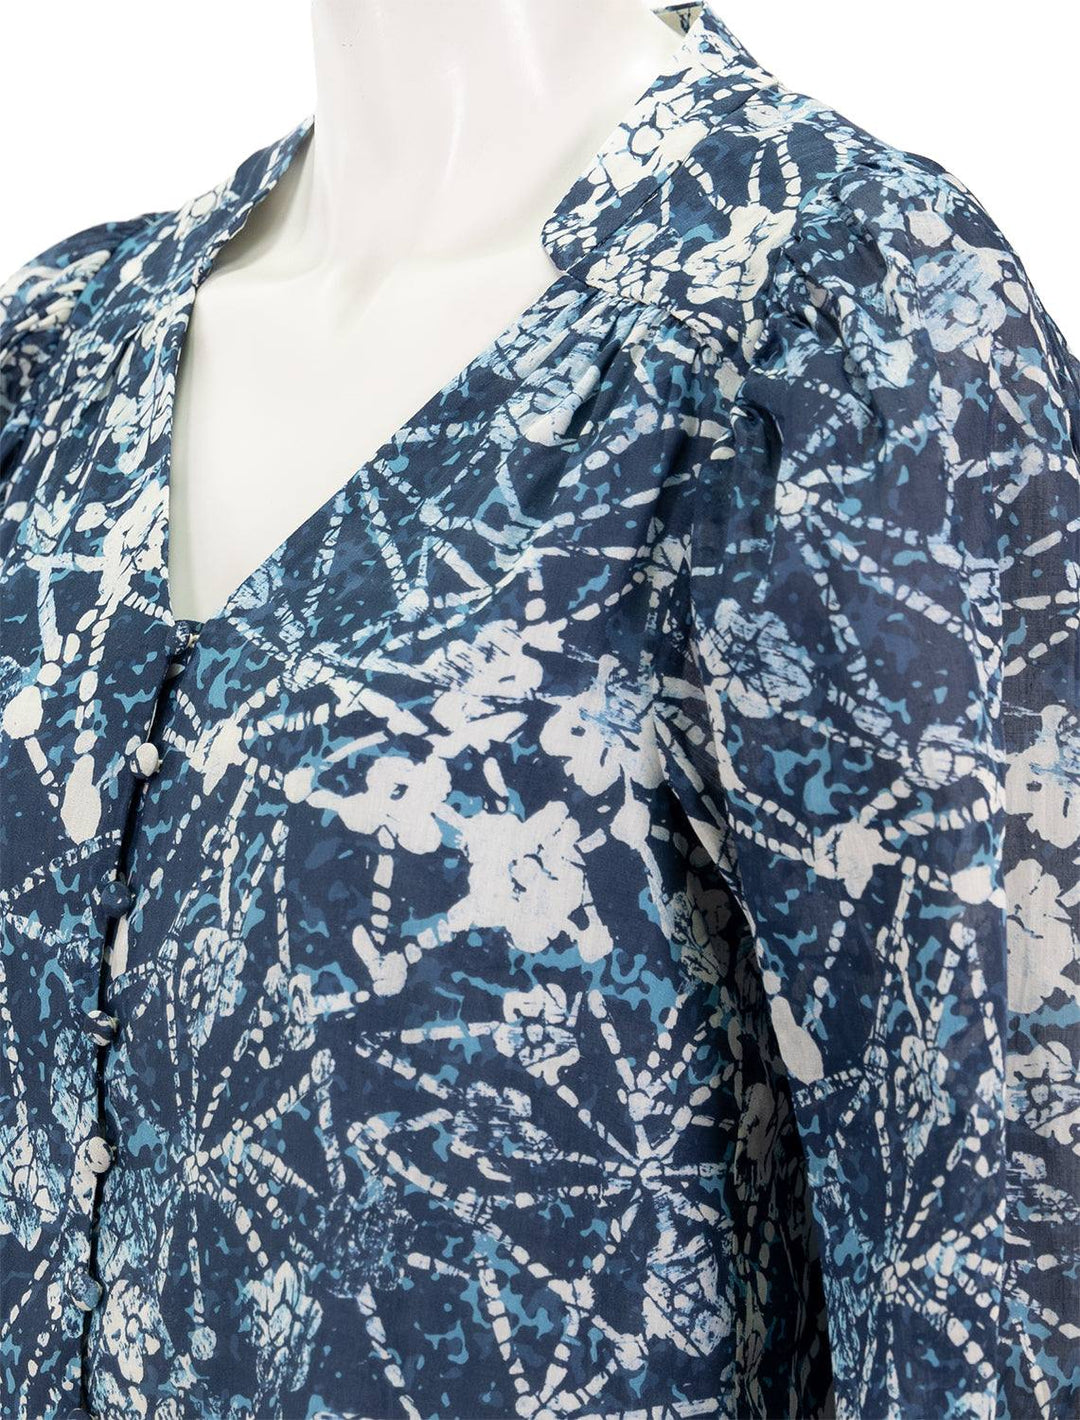 Close-up view of Marie Oliver's imogen blouse in Batik Floral.